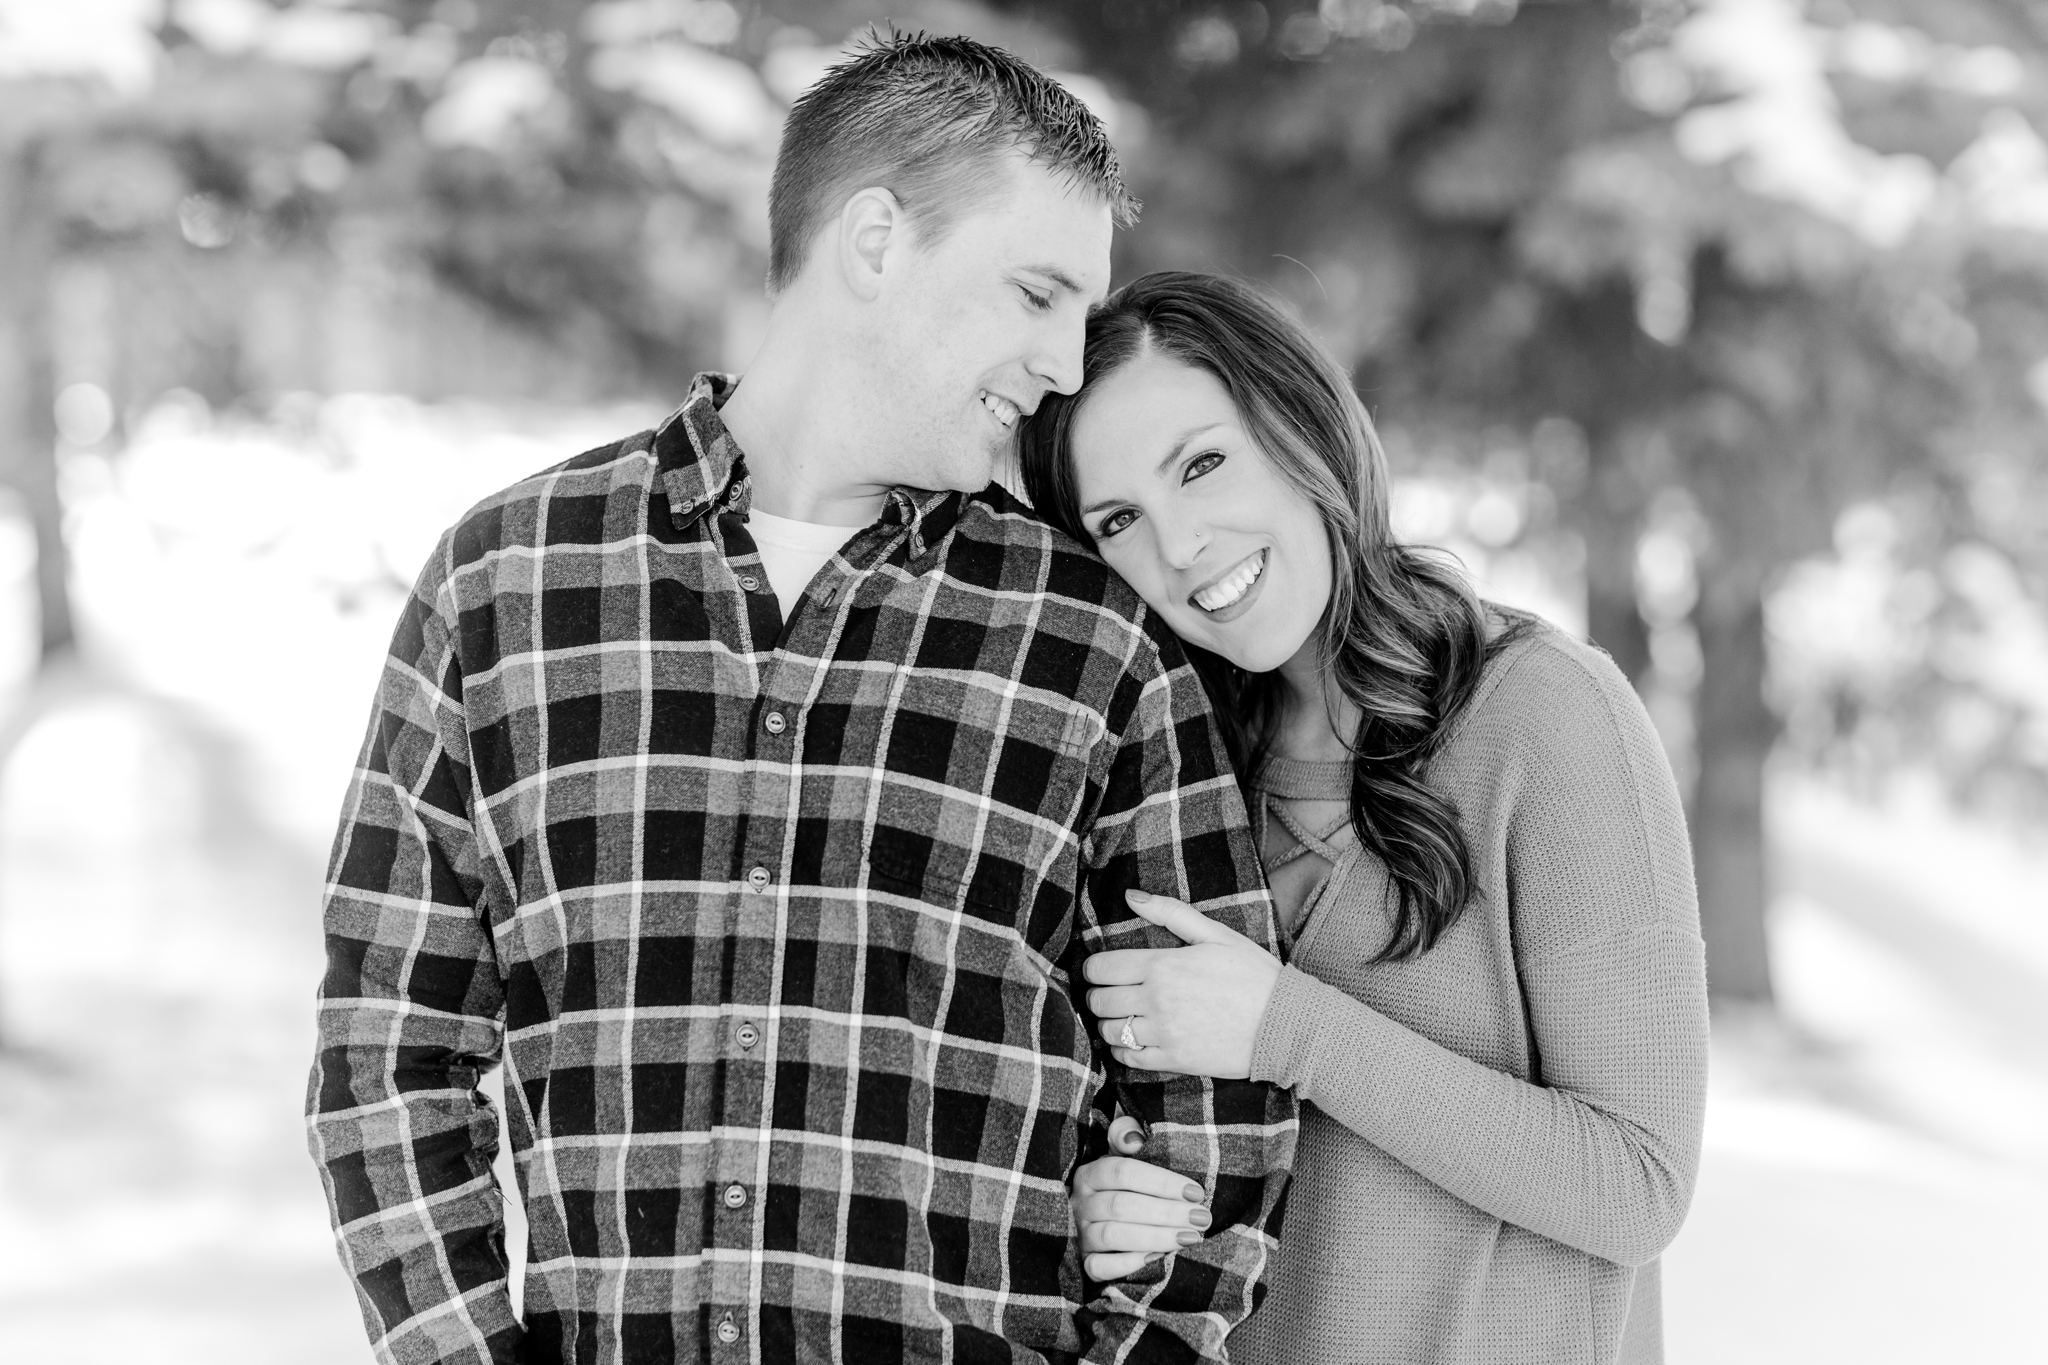 Downtown Fargo Engagement Session, Winter engagement photos, Brittney and Caleb